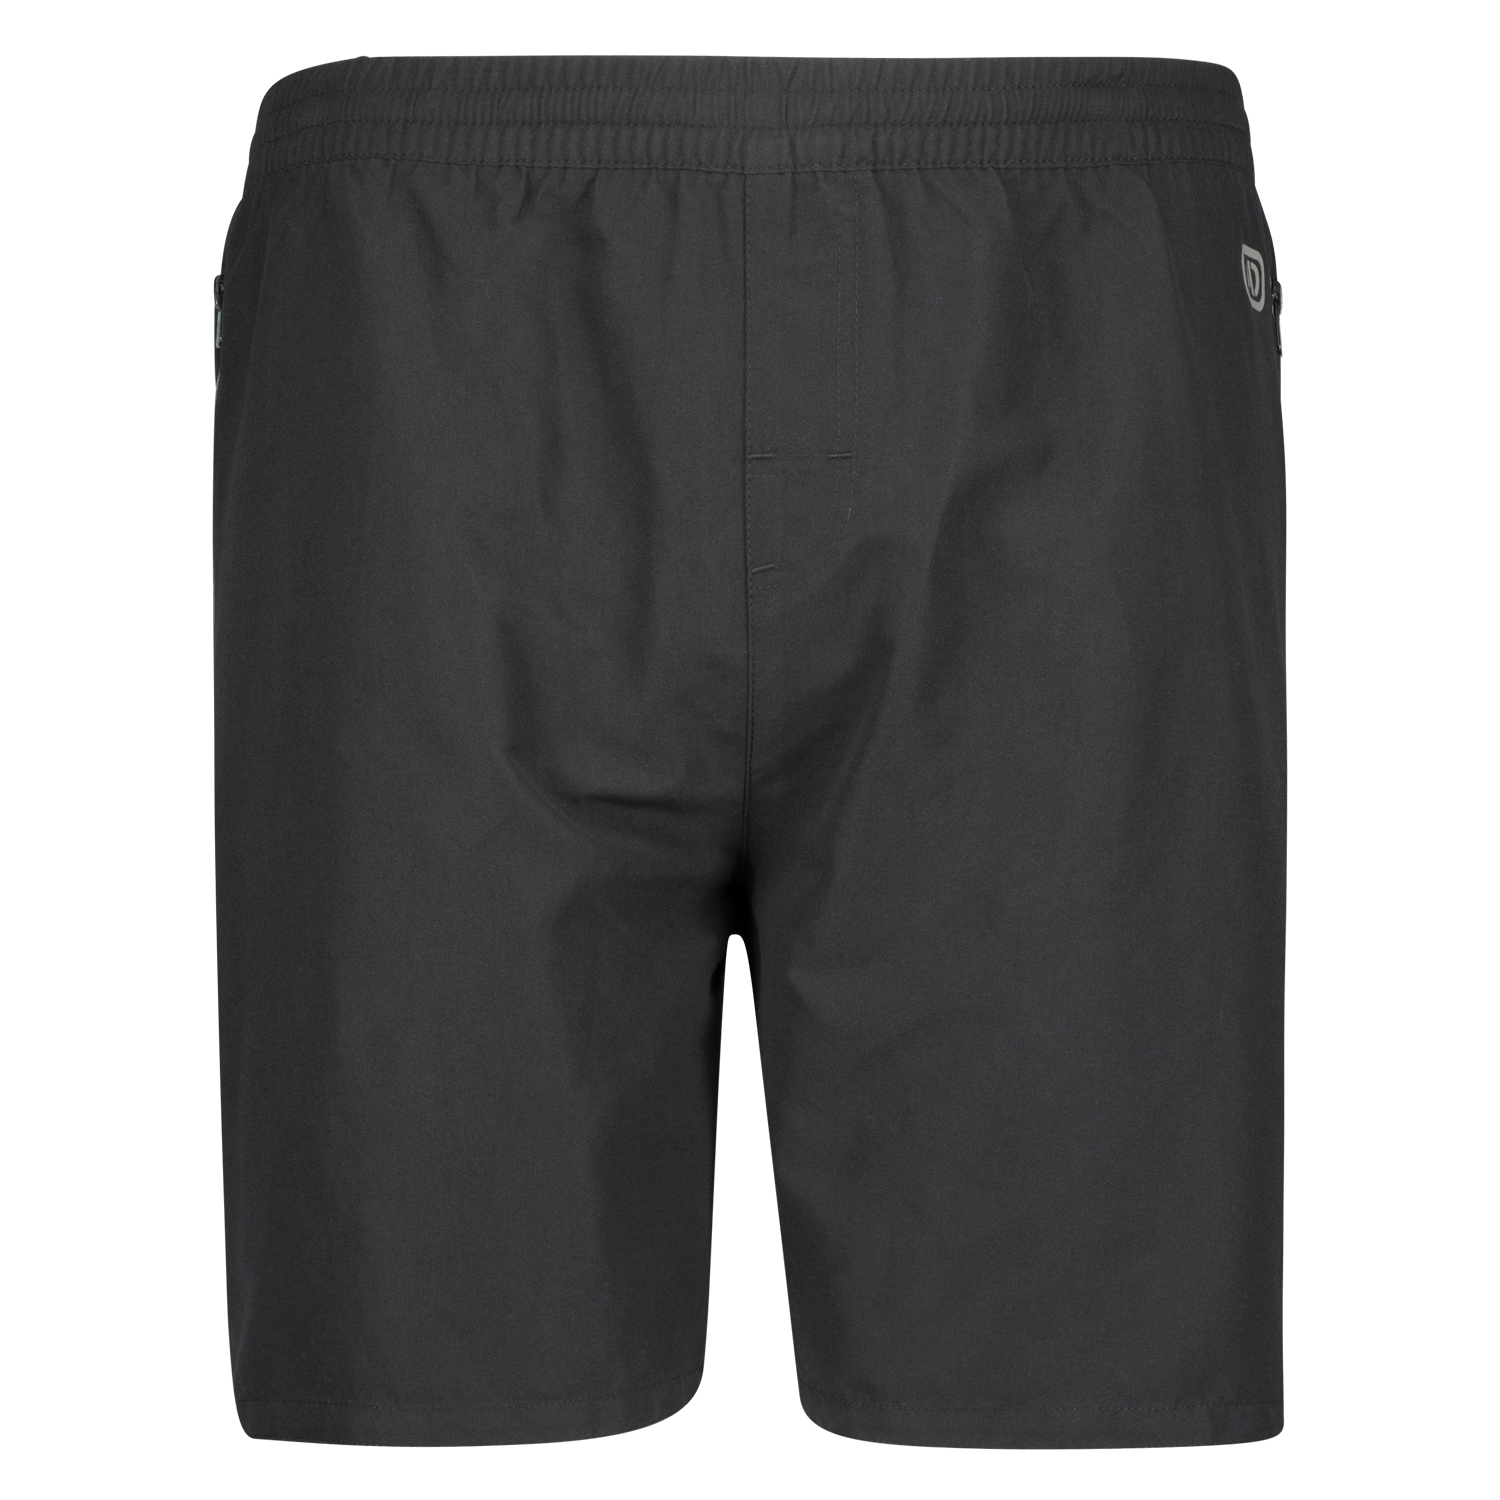 Bermuda shorts in black for men by Adamo series "Otto" in oversizes up to 14XL